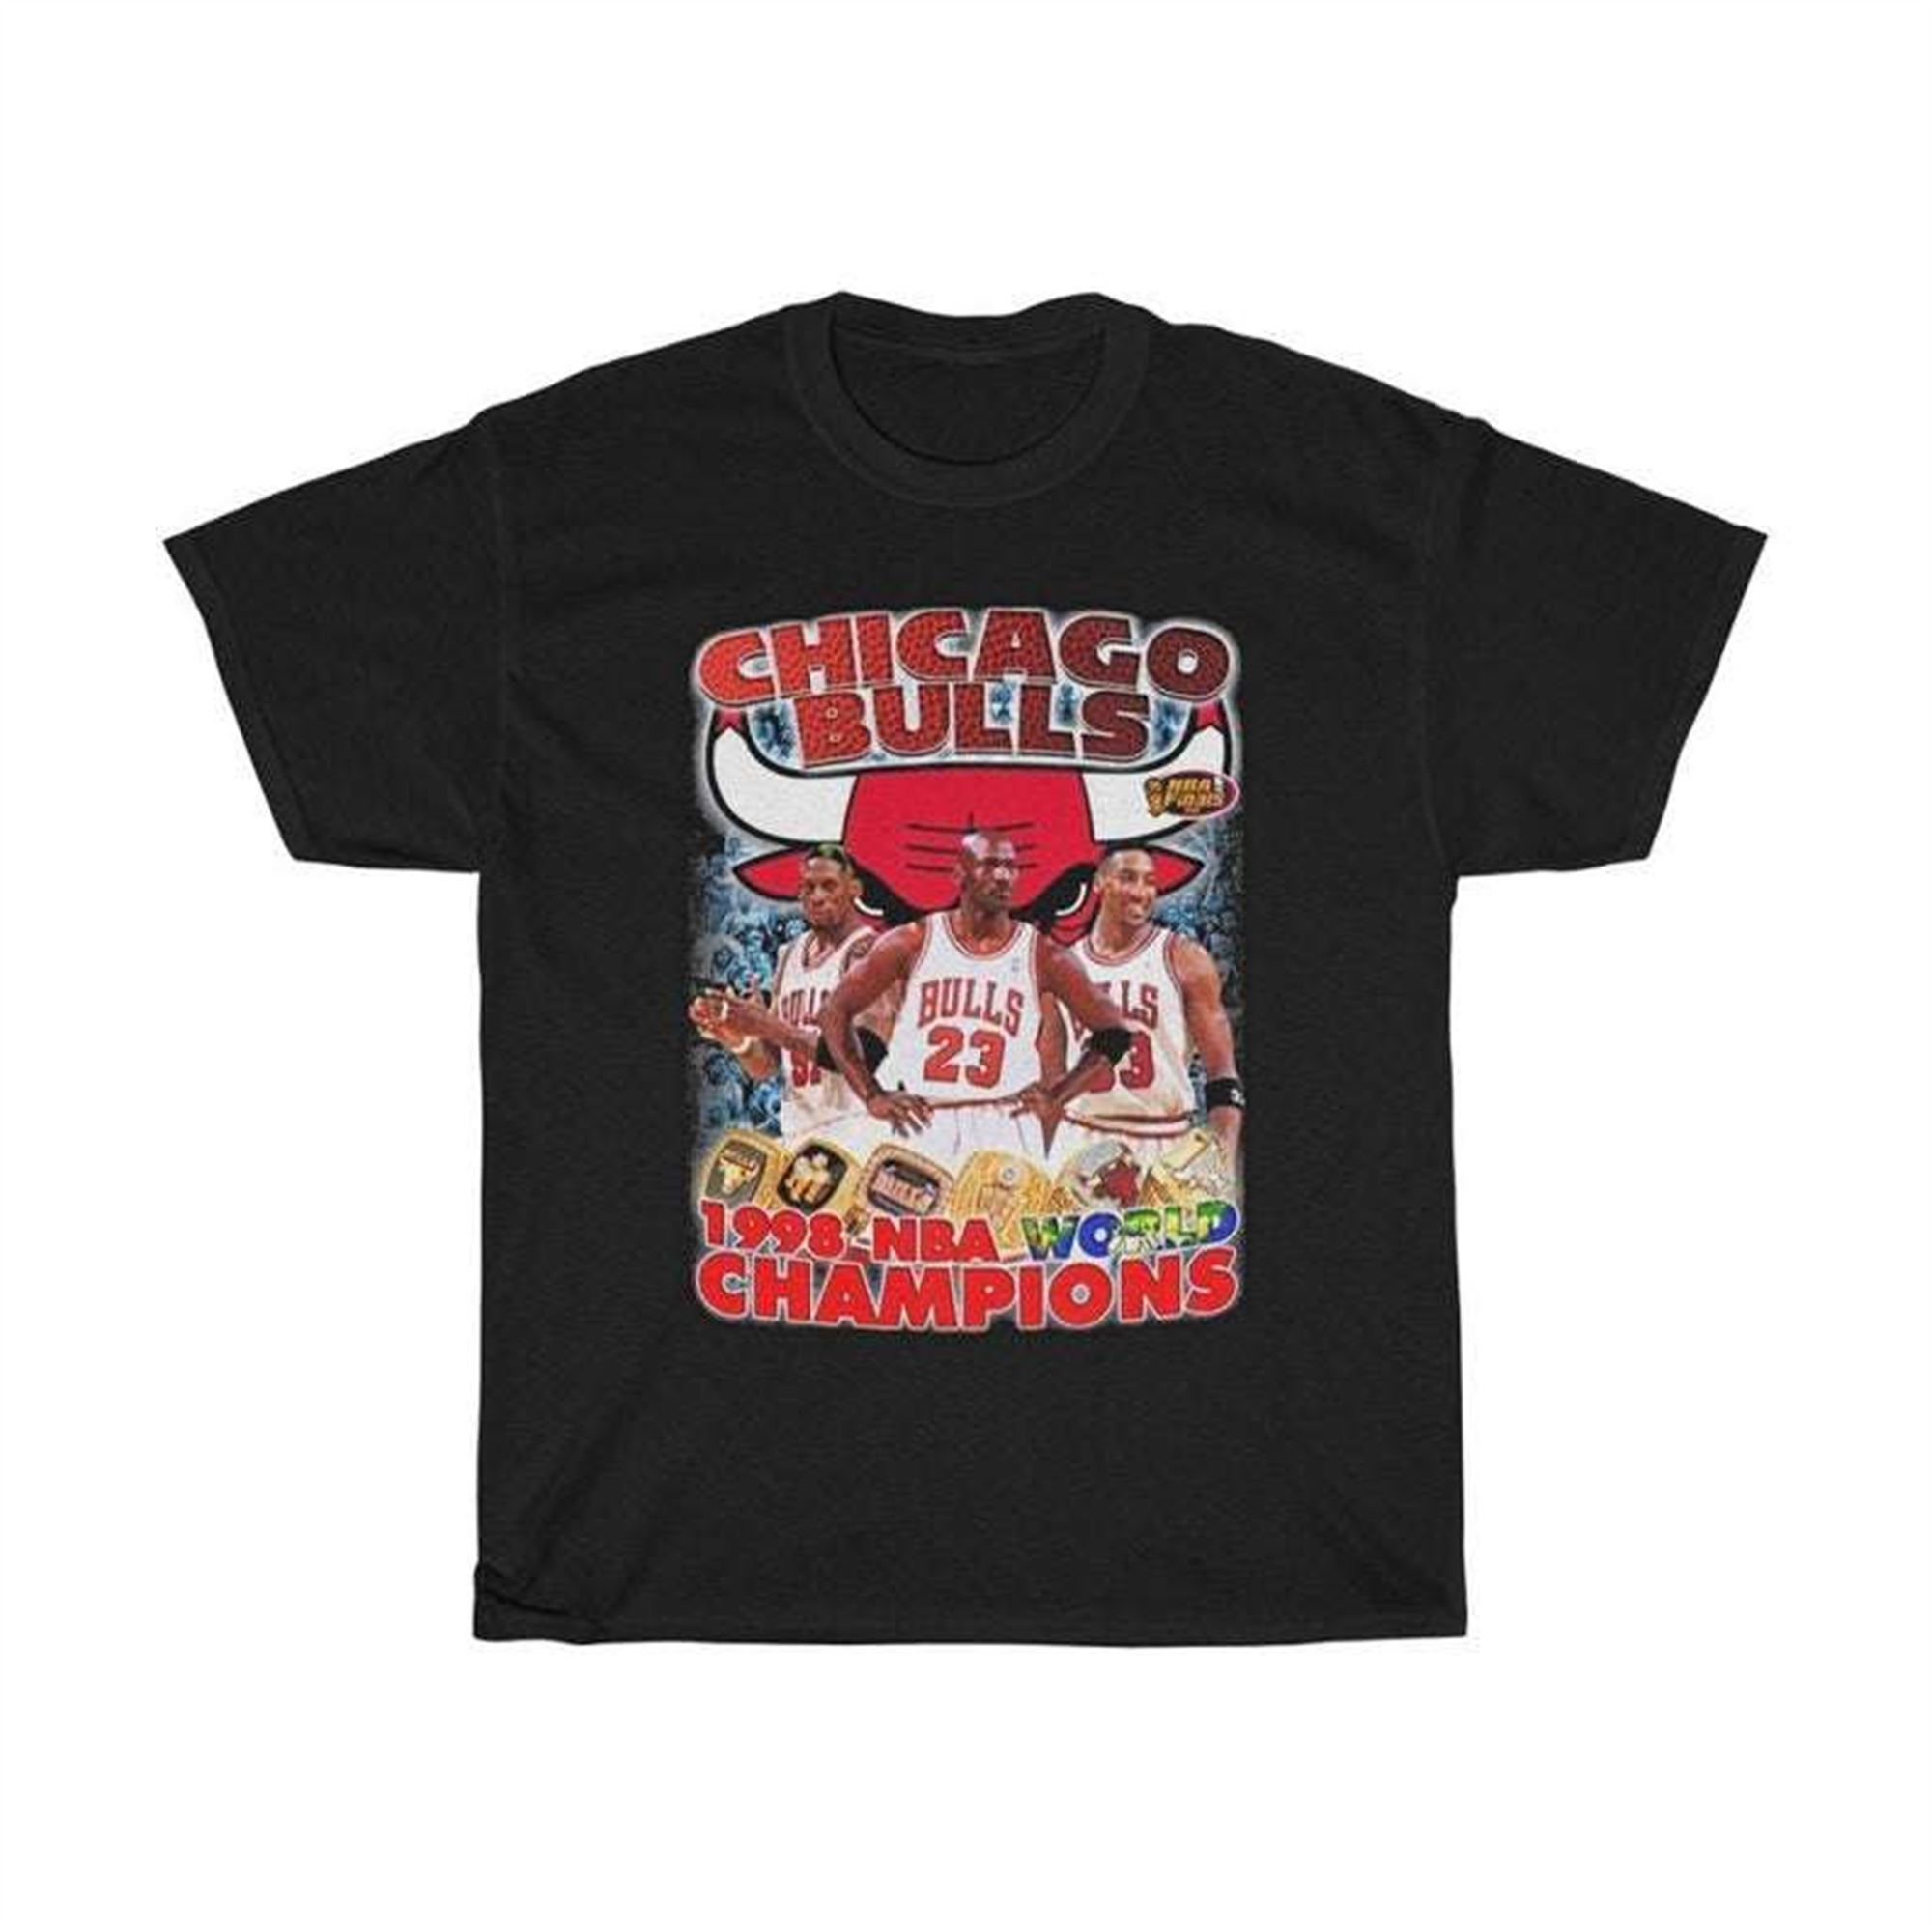 Chicago Bulls Vintage 1998 3 Peat Championship T Shirt Size Up To 5xl